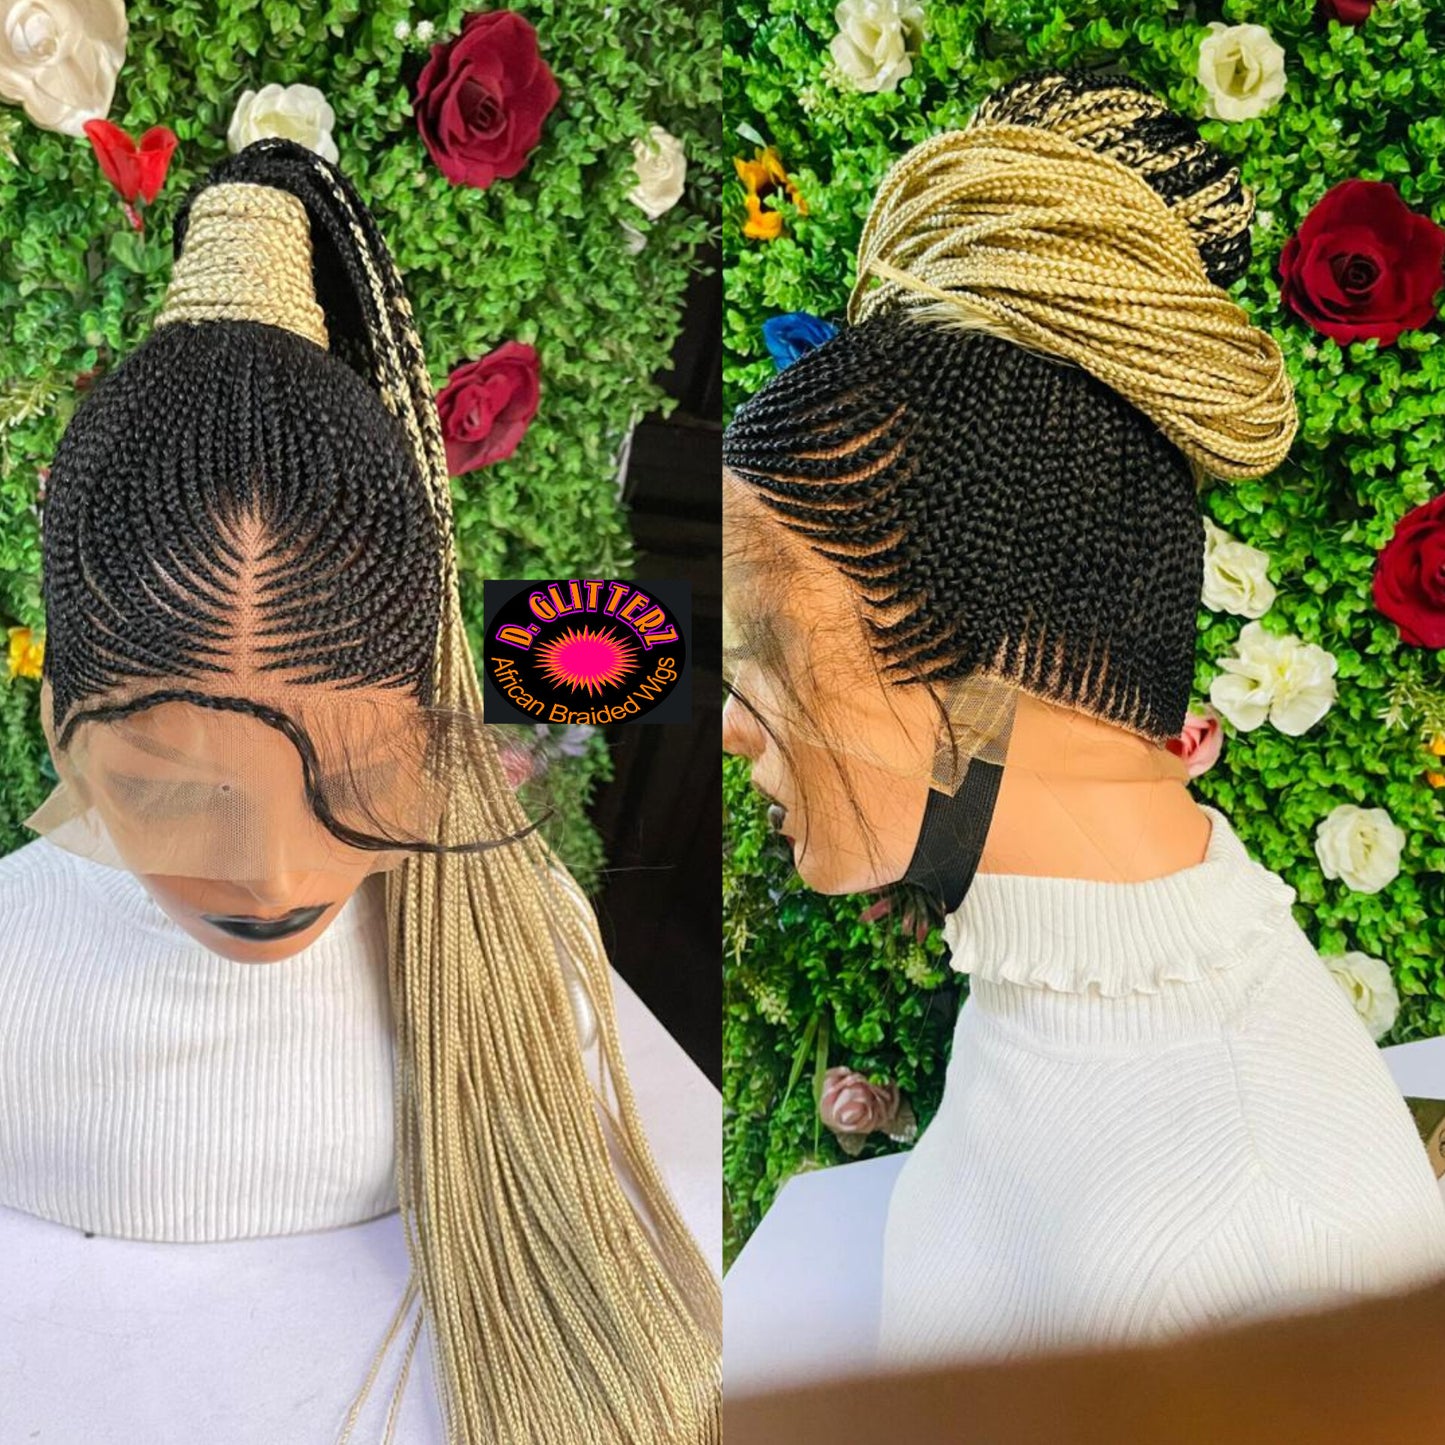 PONYTAIL BRAIDED CONROW WIG ON FULL LACE CLOSURE